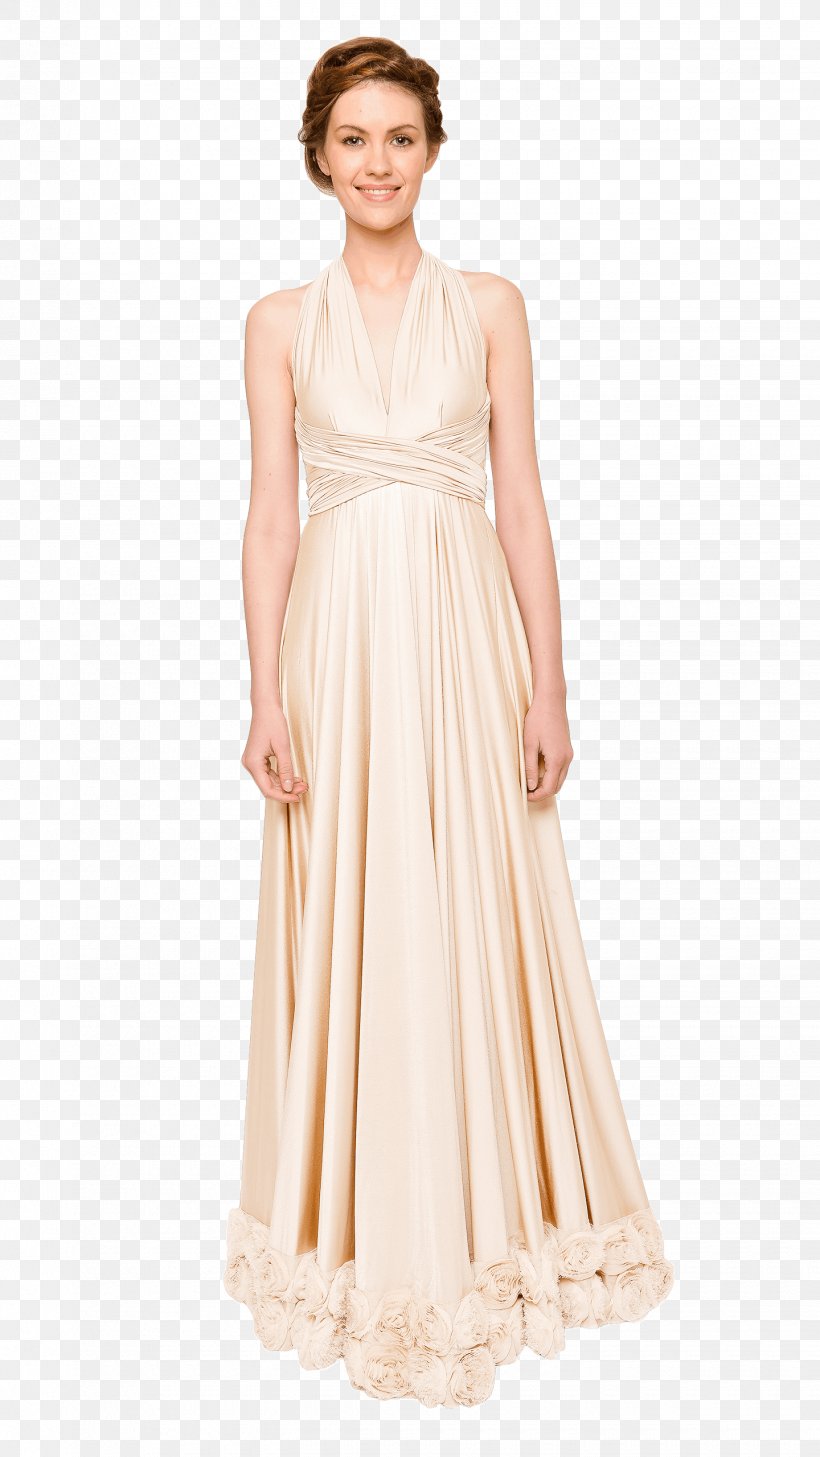 Wedding Dress Clothing Cocktail Dress Formal Wear, PNG, 1440x2560px, Dress, Bridal Clothing, Bridal Party Dress, Bride, Clothing Download Free